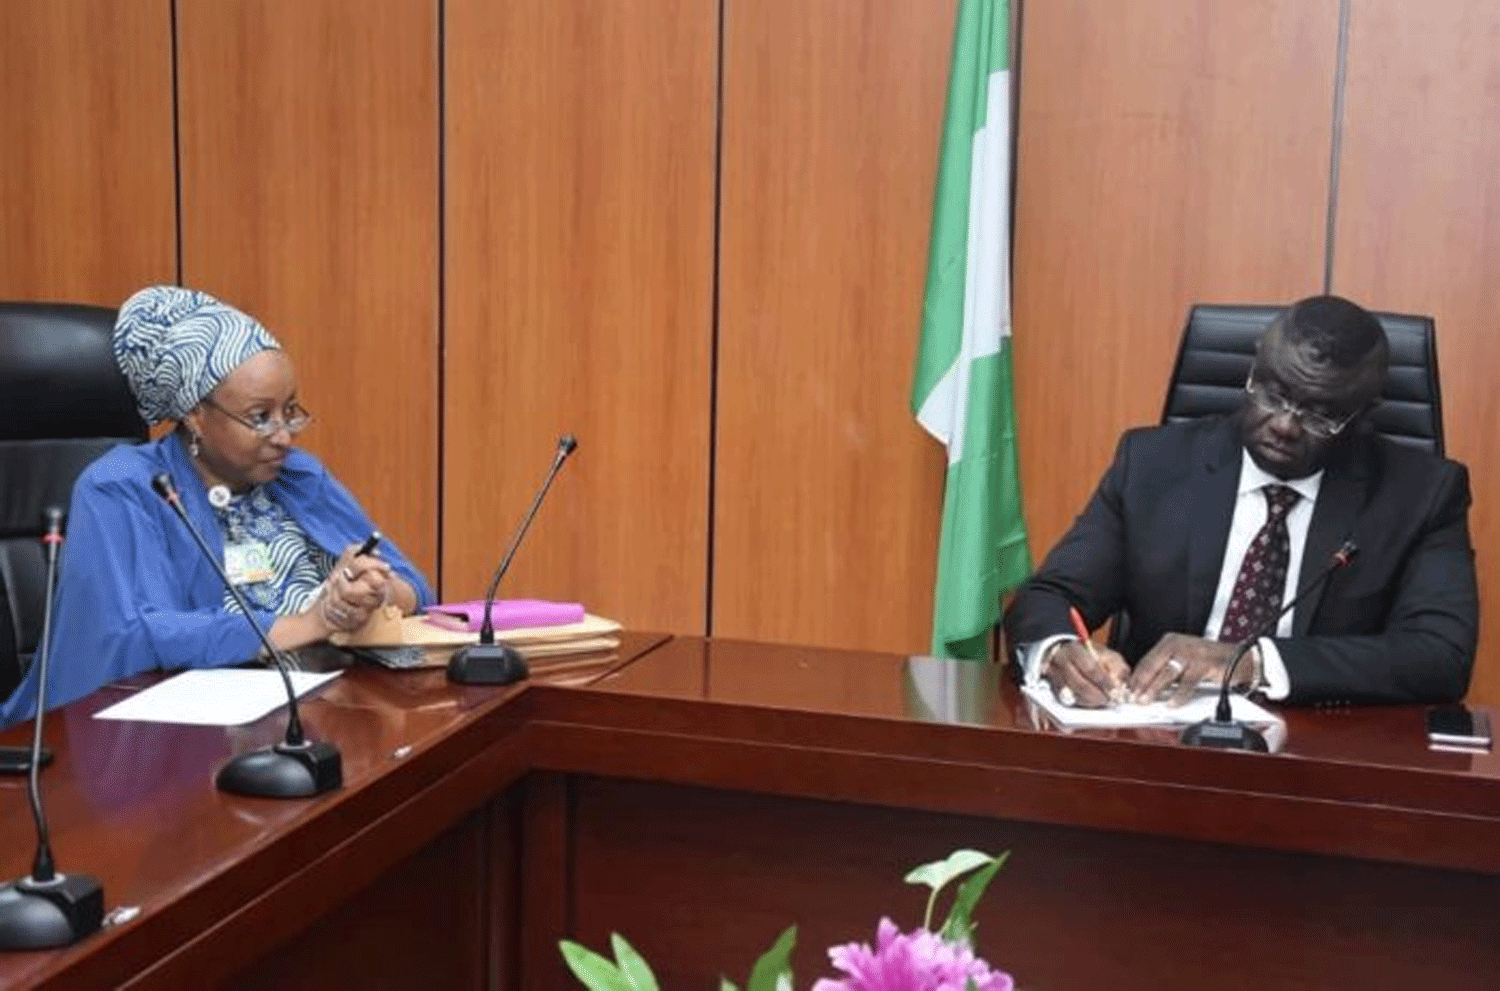 Uwais briefs Budget minister, wants more funds for SIPs